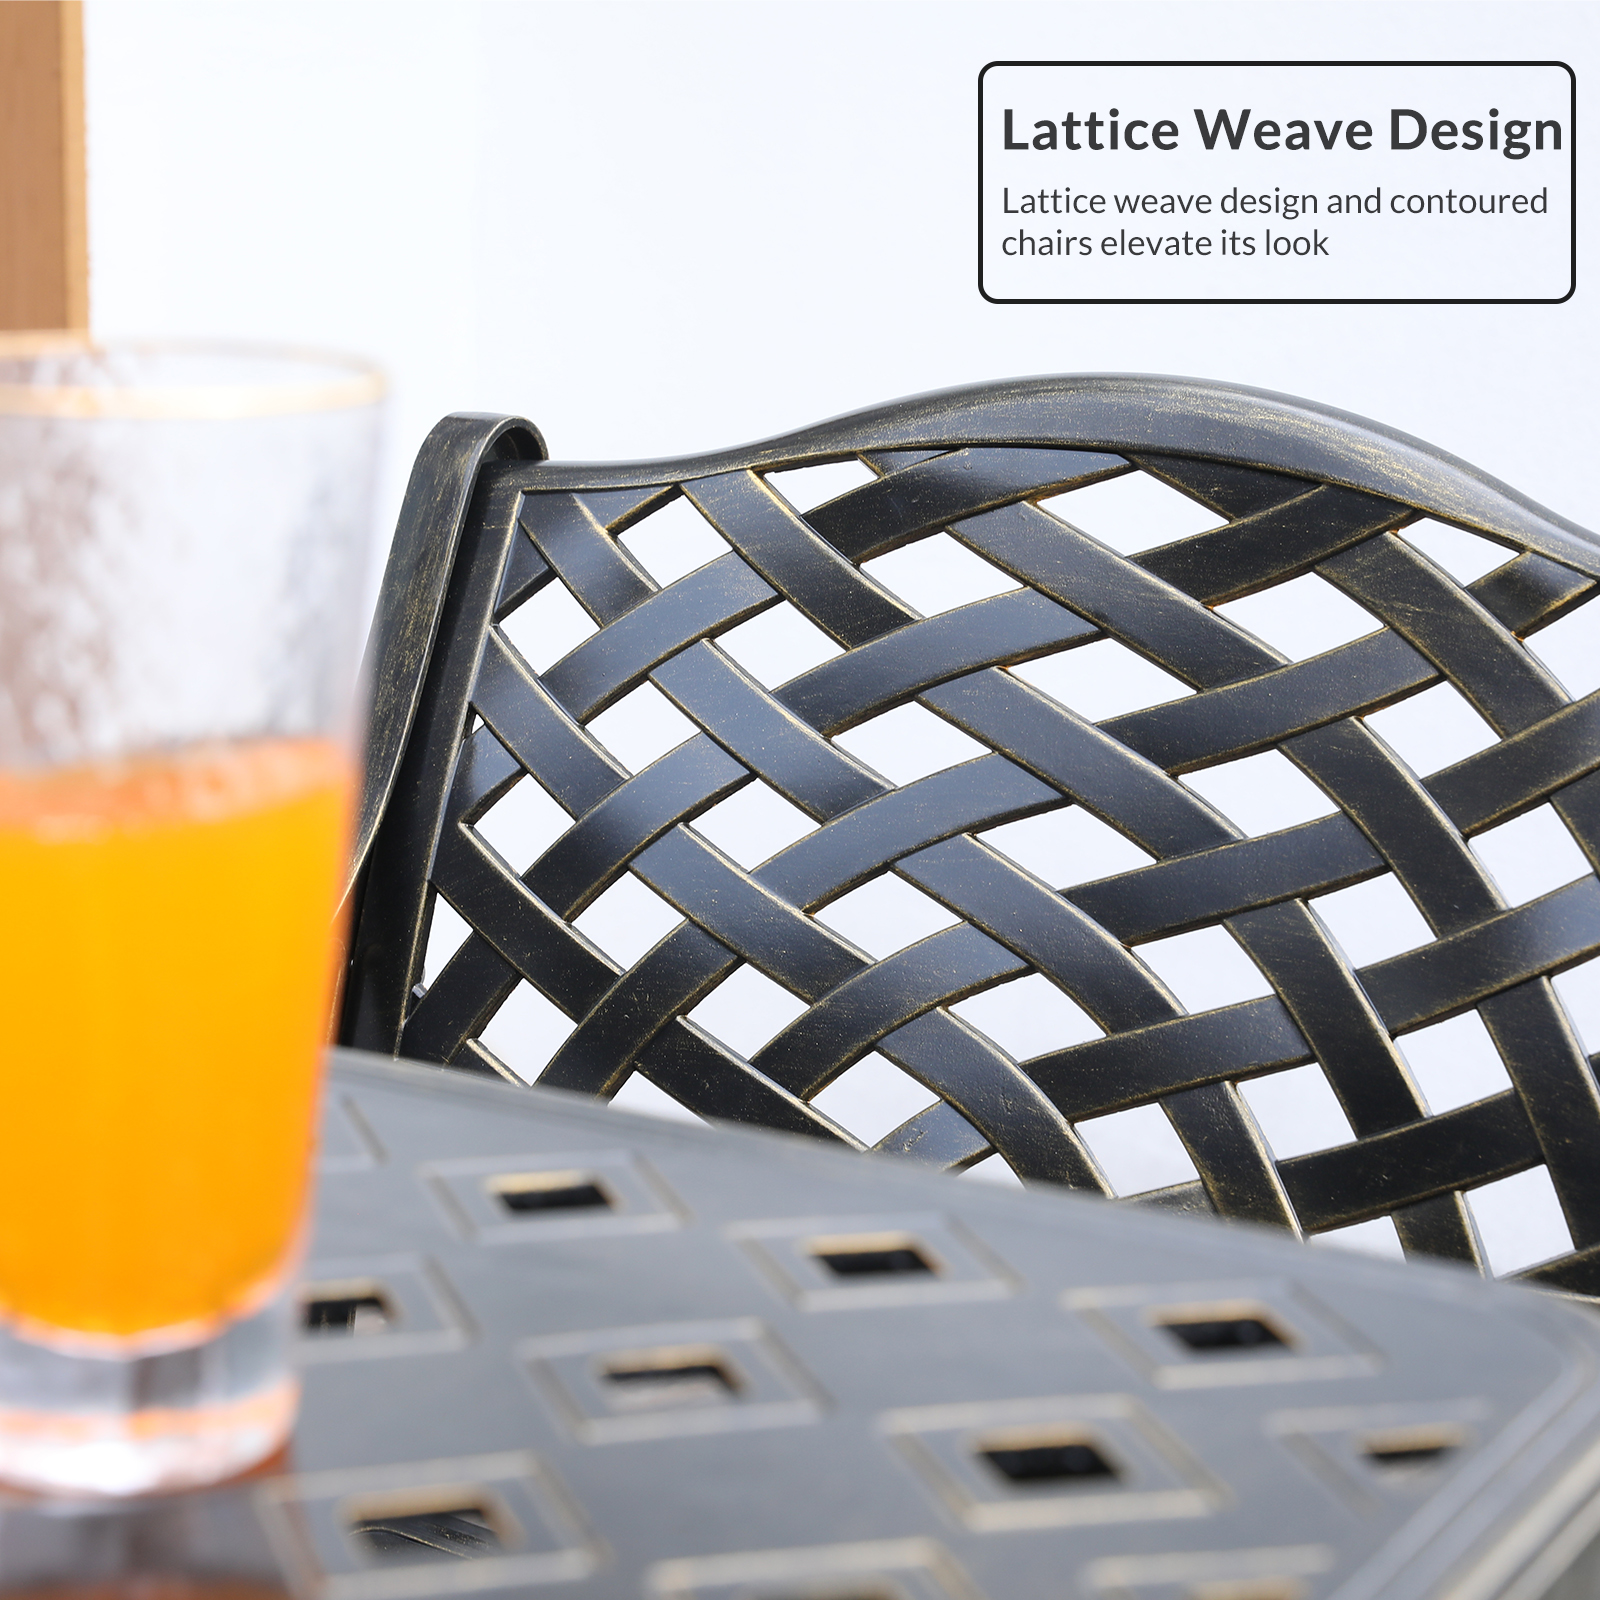 MEETWARM 2 Piece Patio Dining Chairs, Outdoor All-Weather Cast Aluminum Chairs, Patio Bistro Dining Chair Set of 2 for Garden Deck Backyard, Lattice Weave Design - image 5 of 7